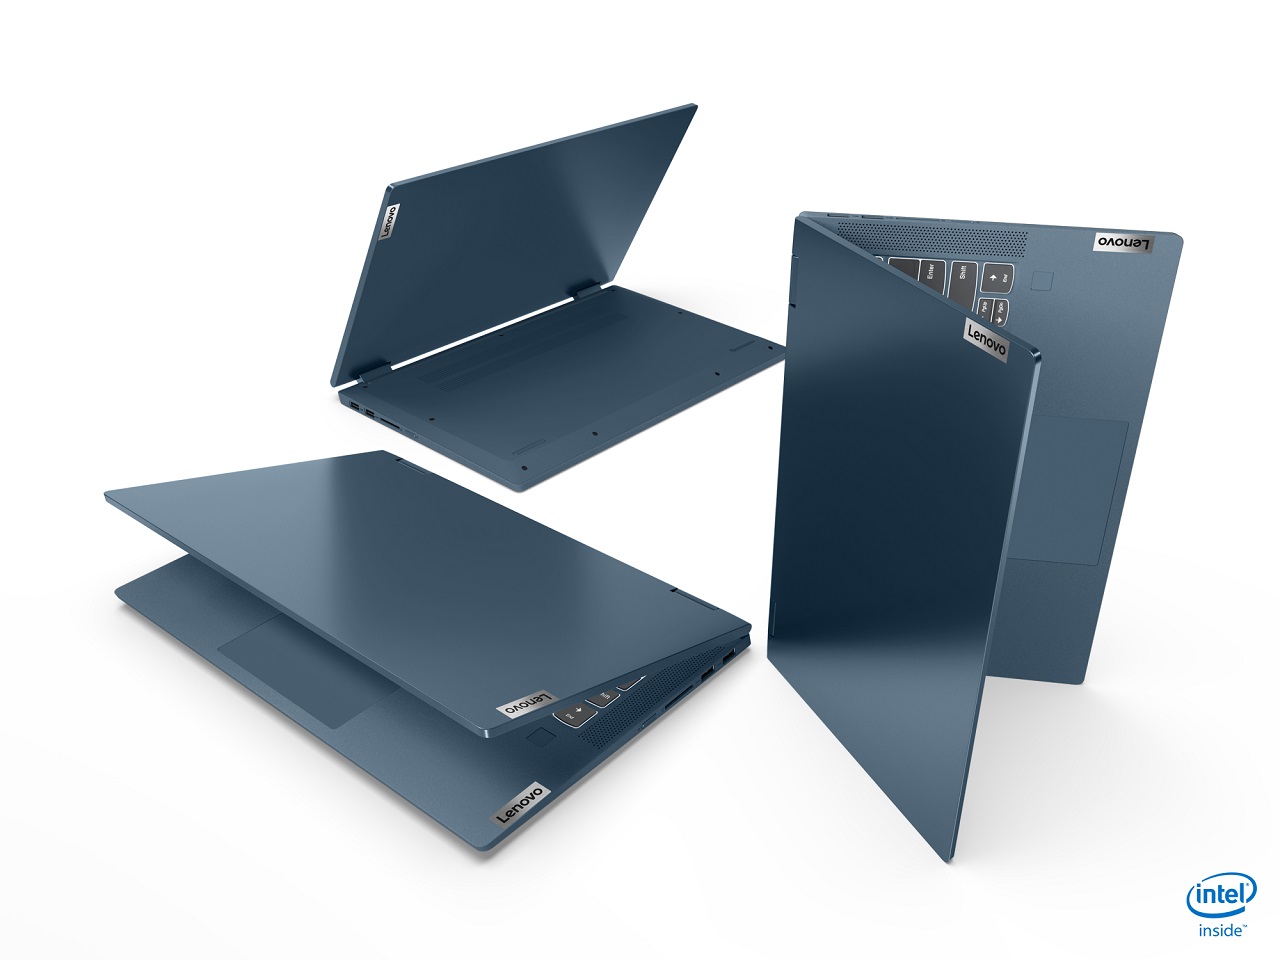 Lenovo Ideapad Flex 5 • Why The Lenovo Ideapad Is The Right Laptop For You